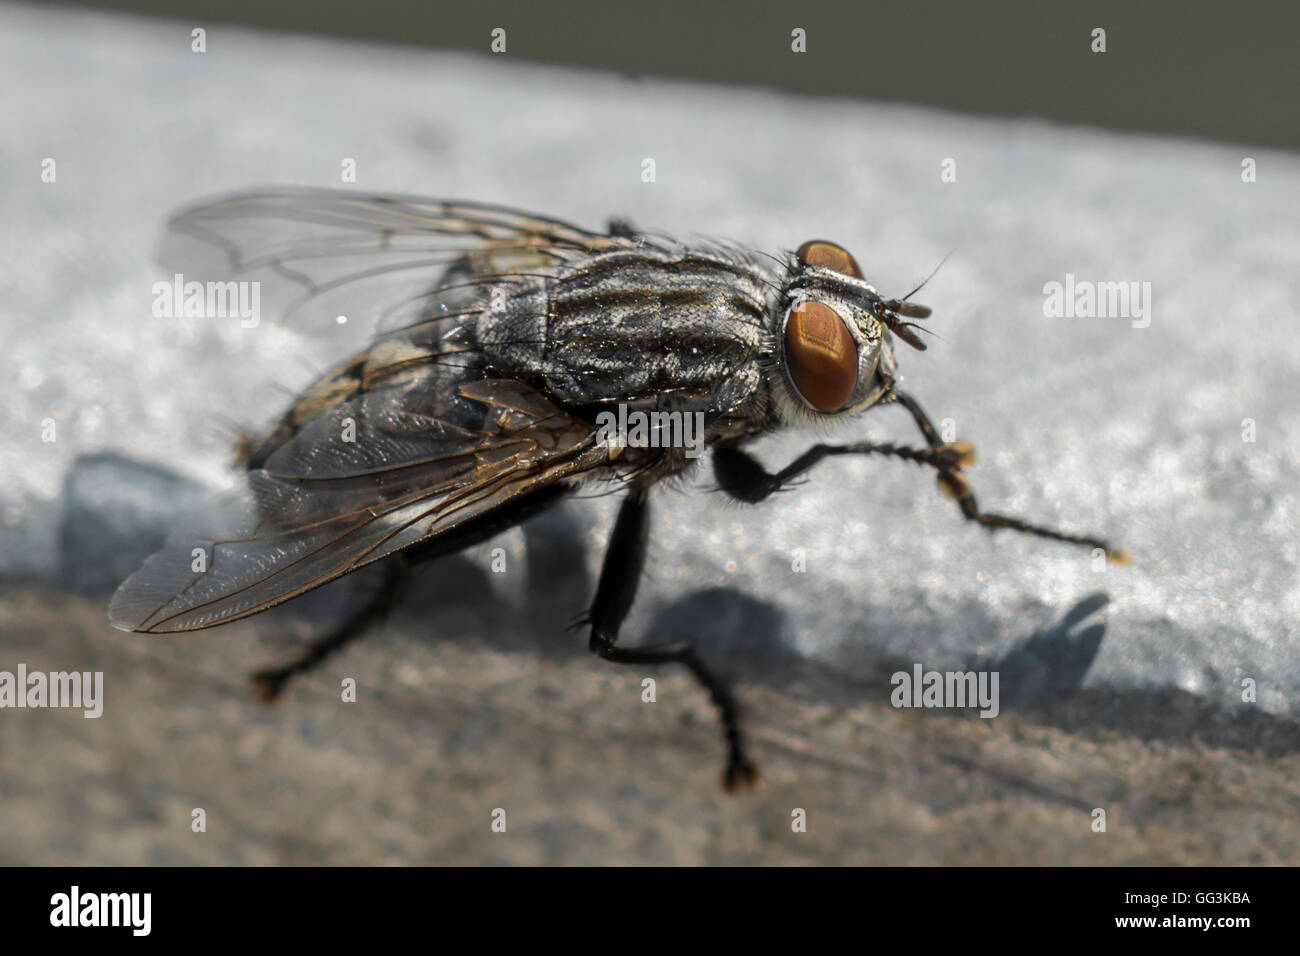 Closeup of a big fly at a sunny day outdoor Stock Photo